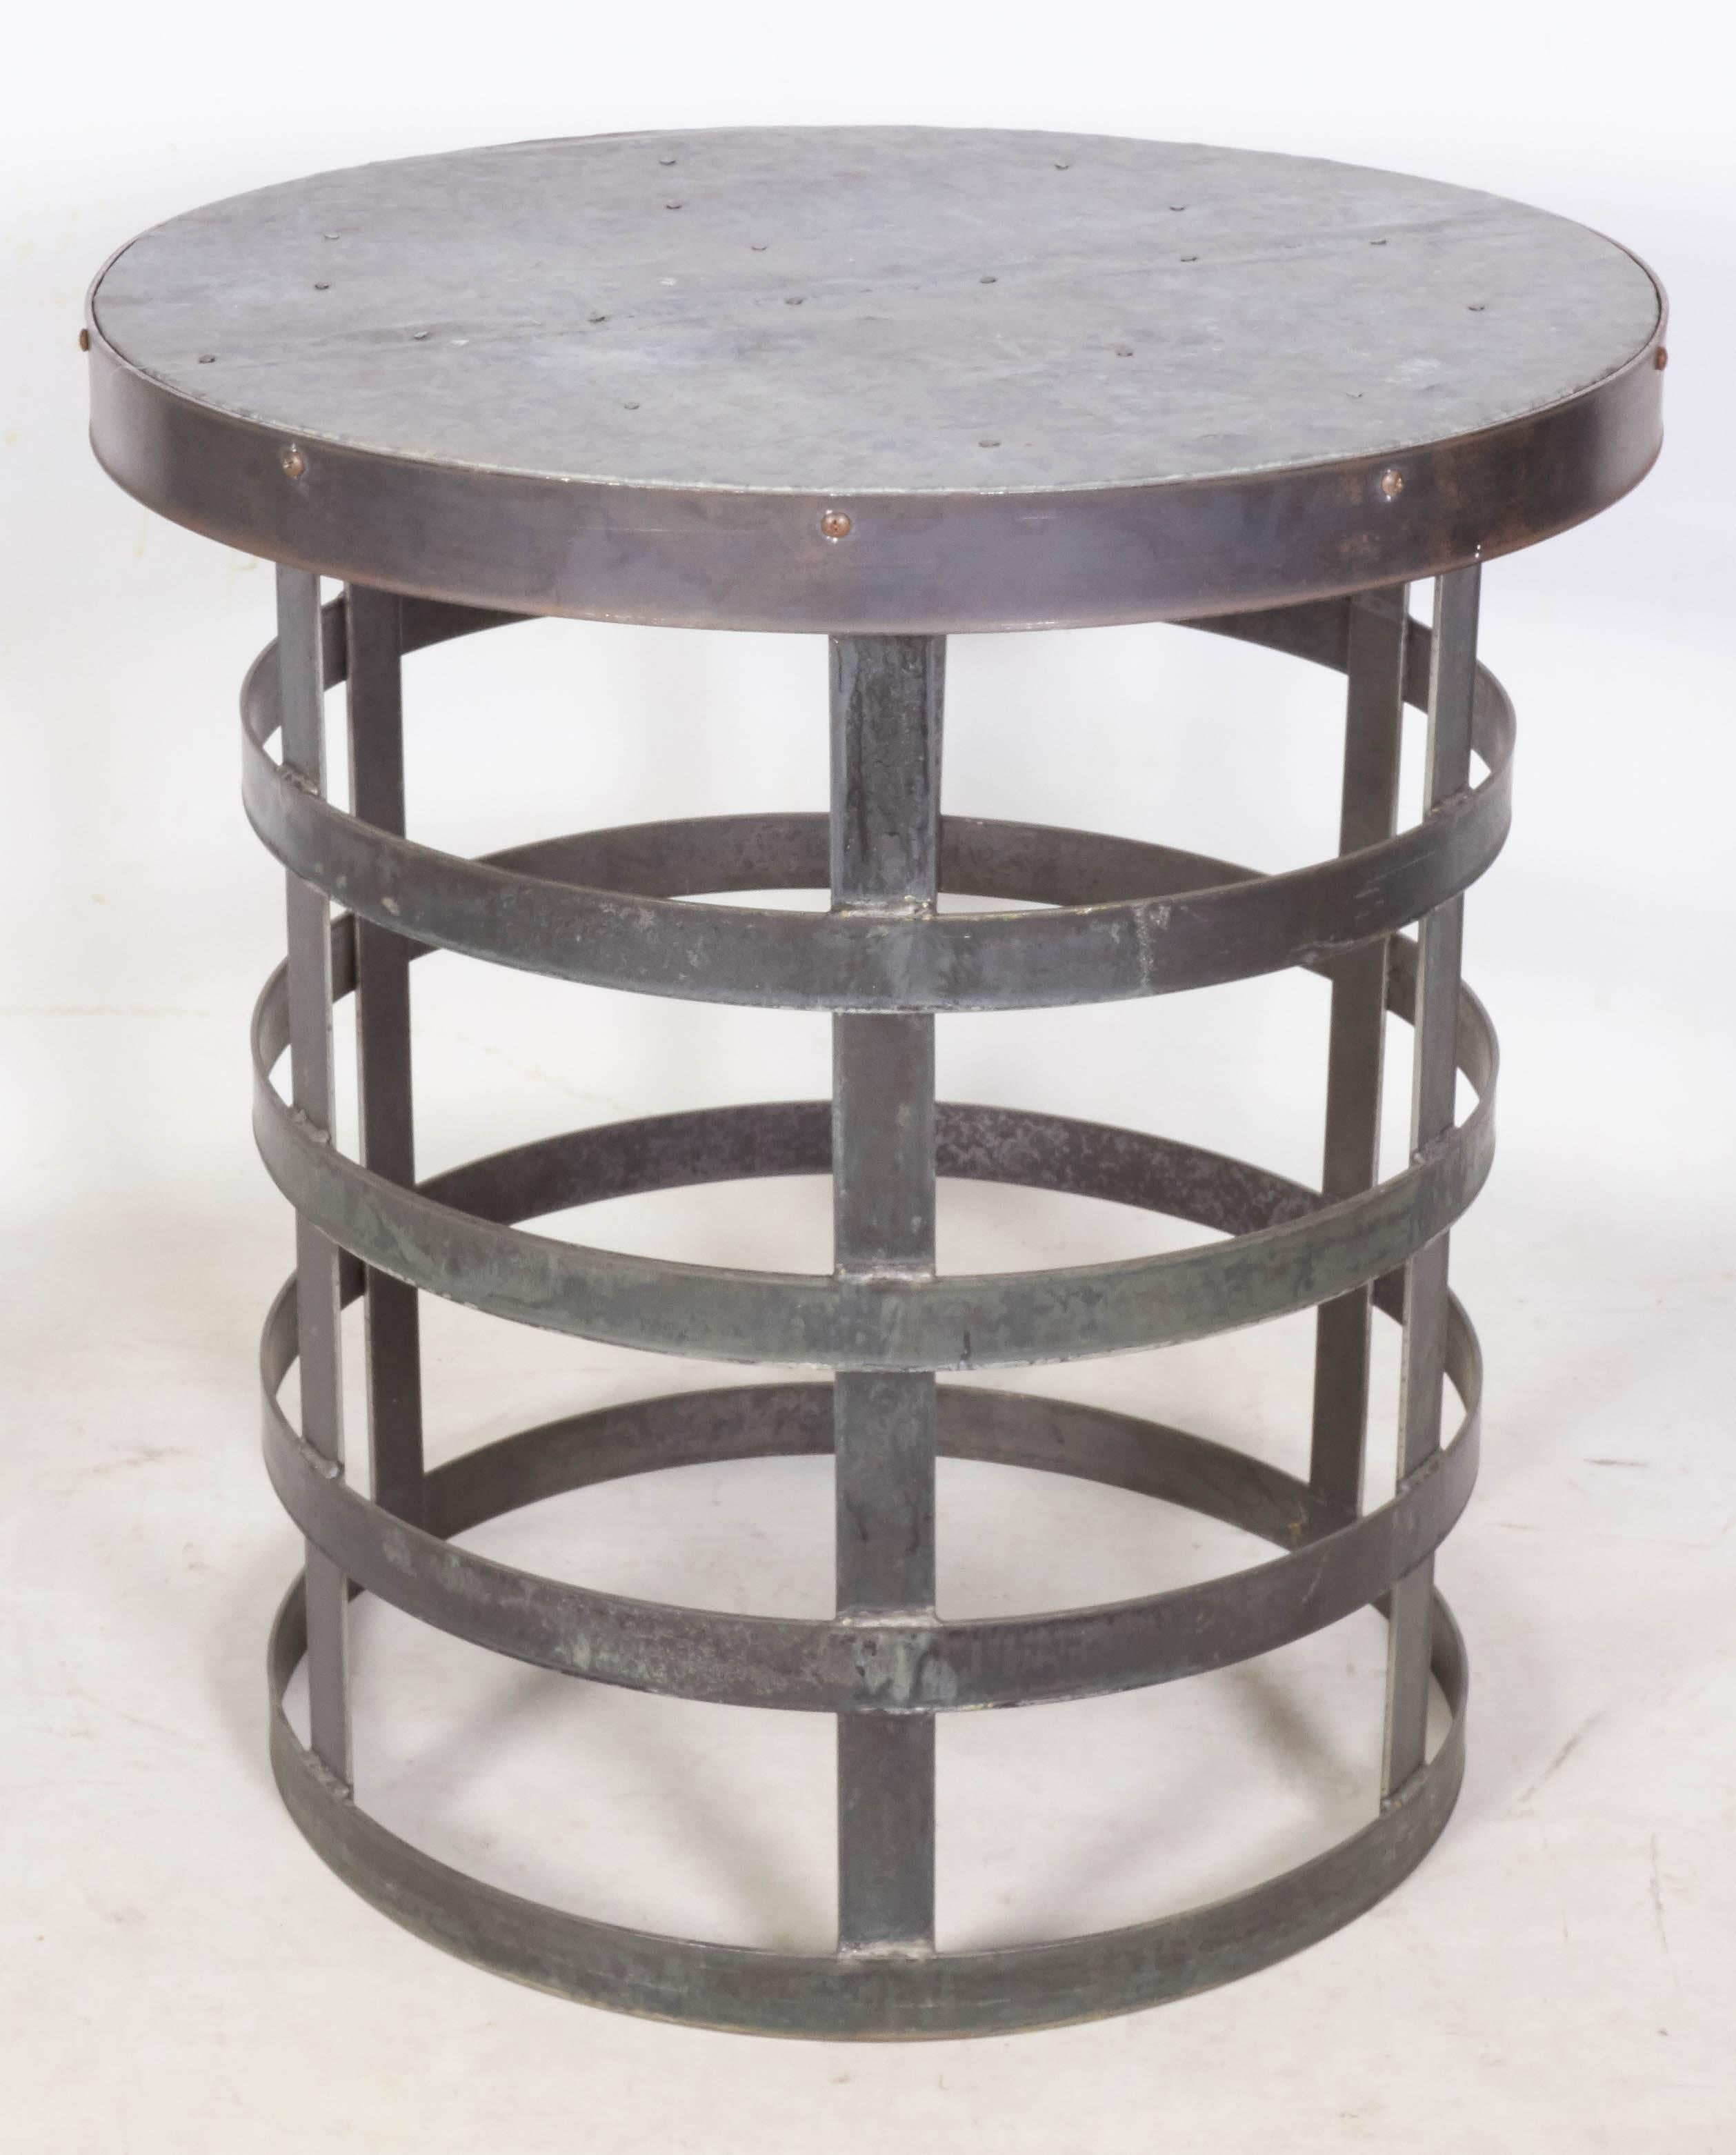 20th Century Pair of Rustic Tables Crafted in Galvanized Zinc